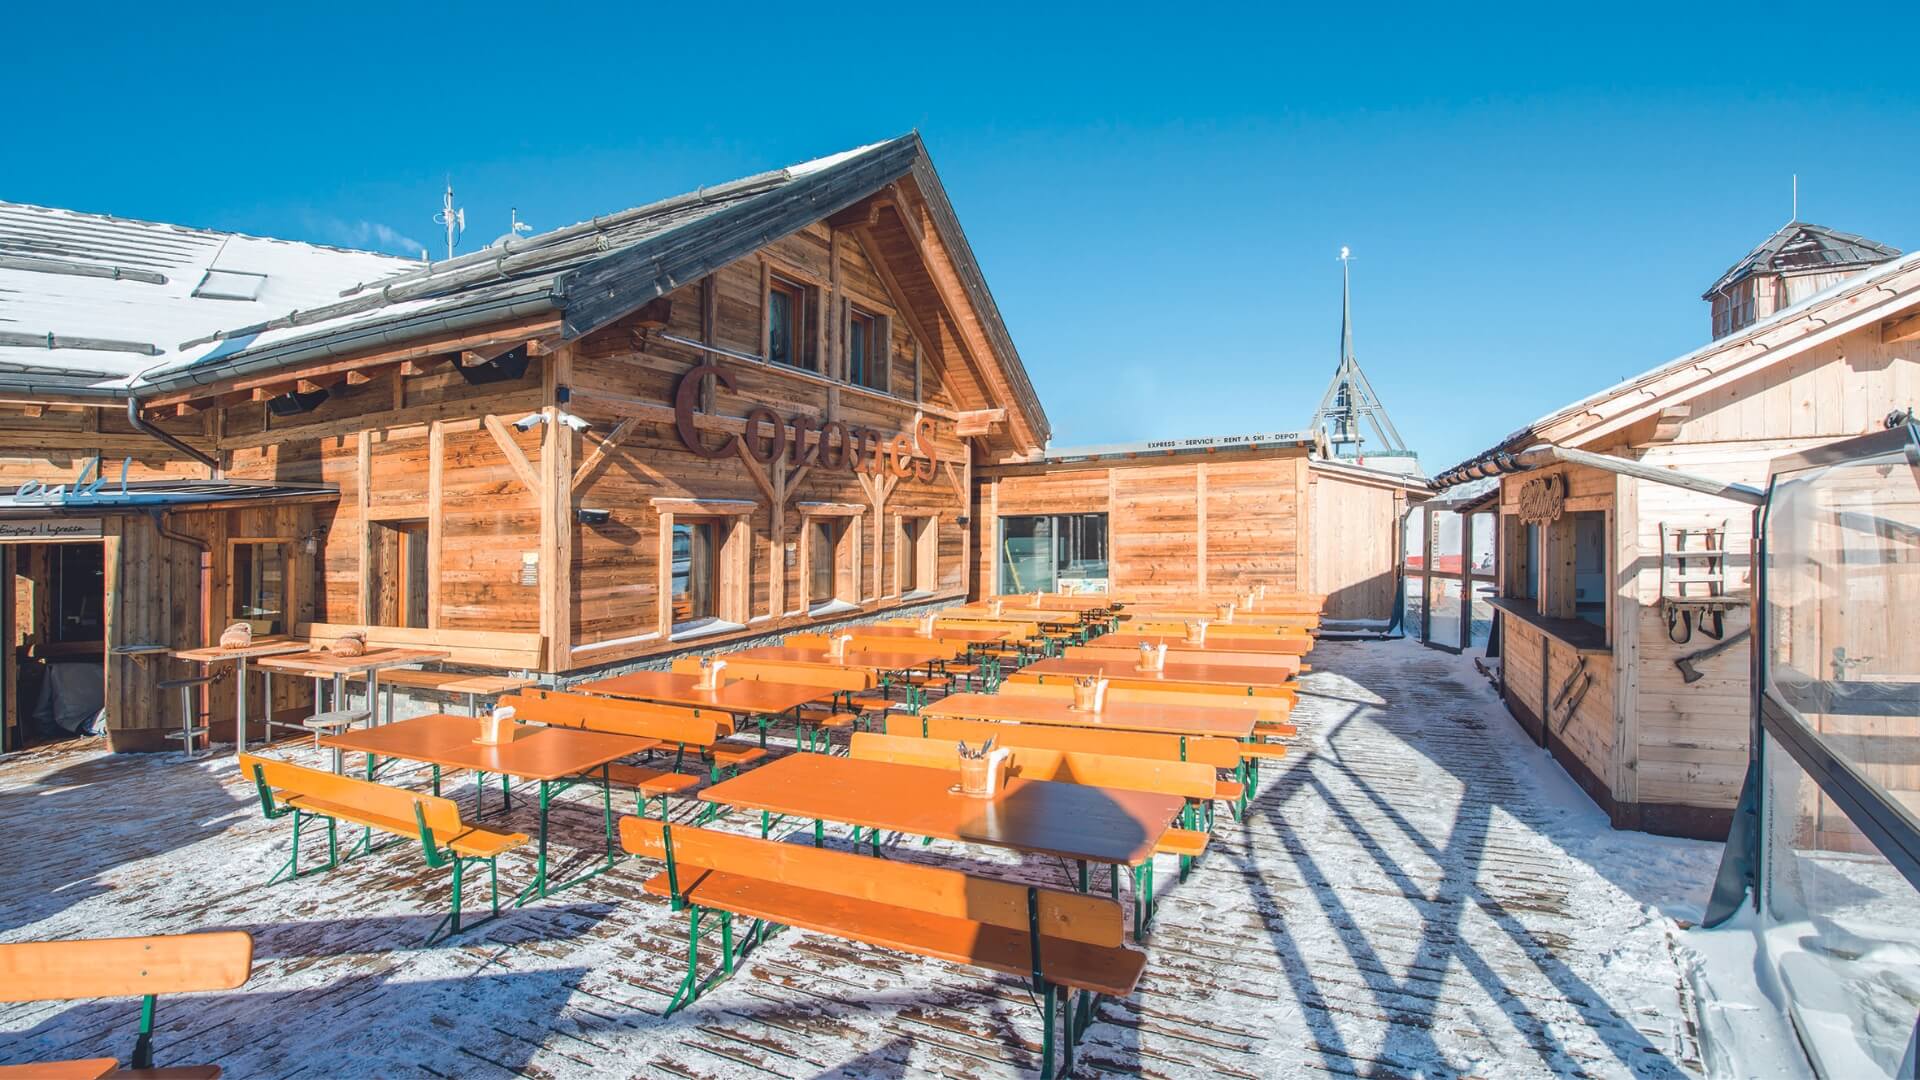 In winter, wide beer garden table sets with backrests were set up in front of the hut.